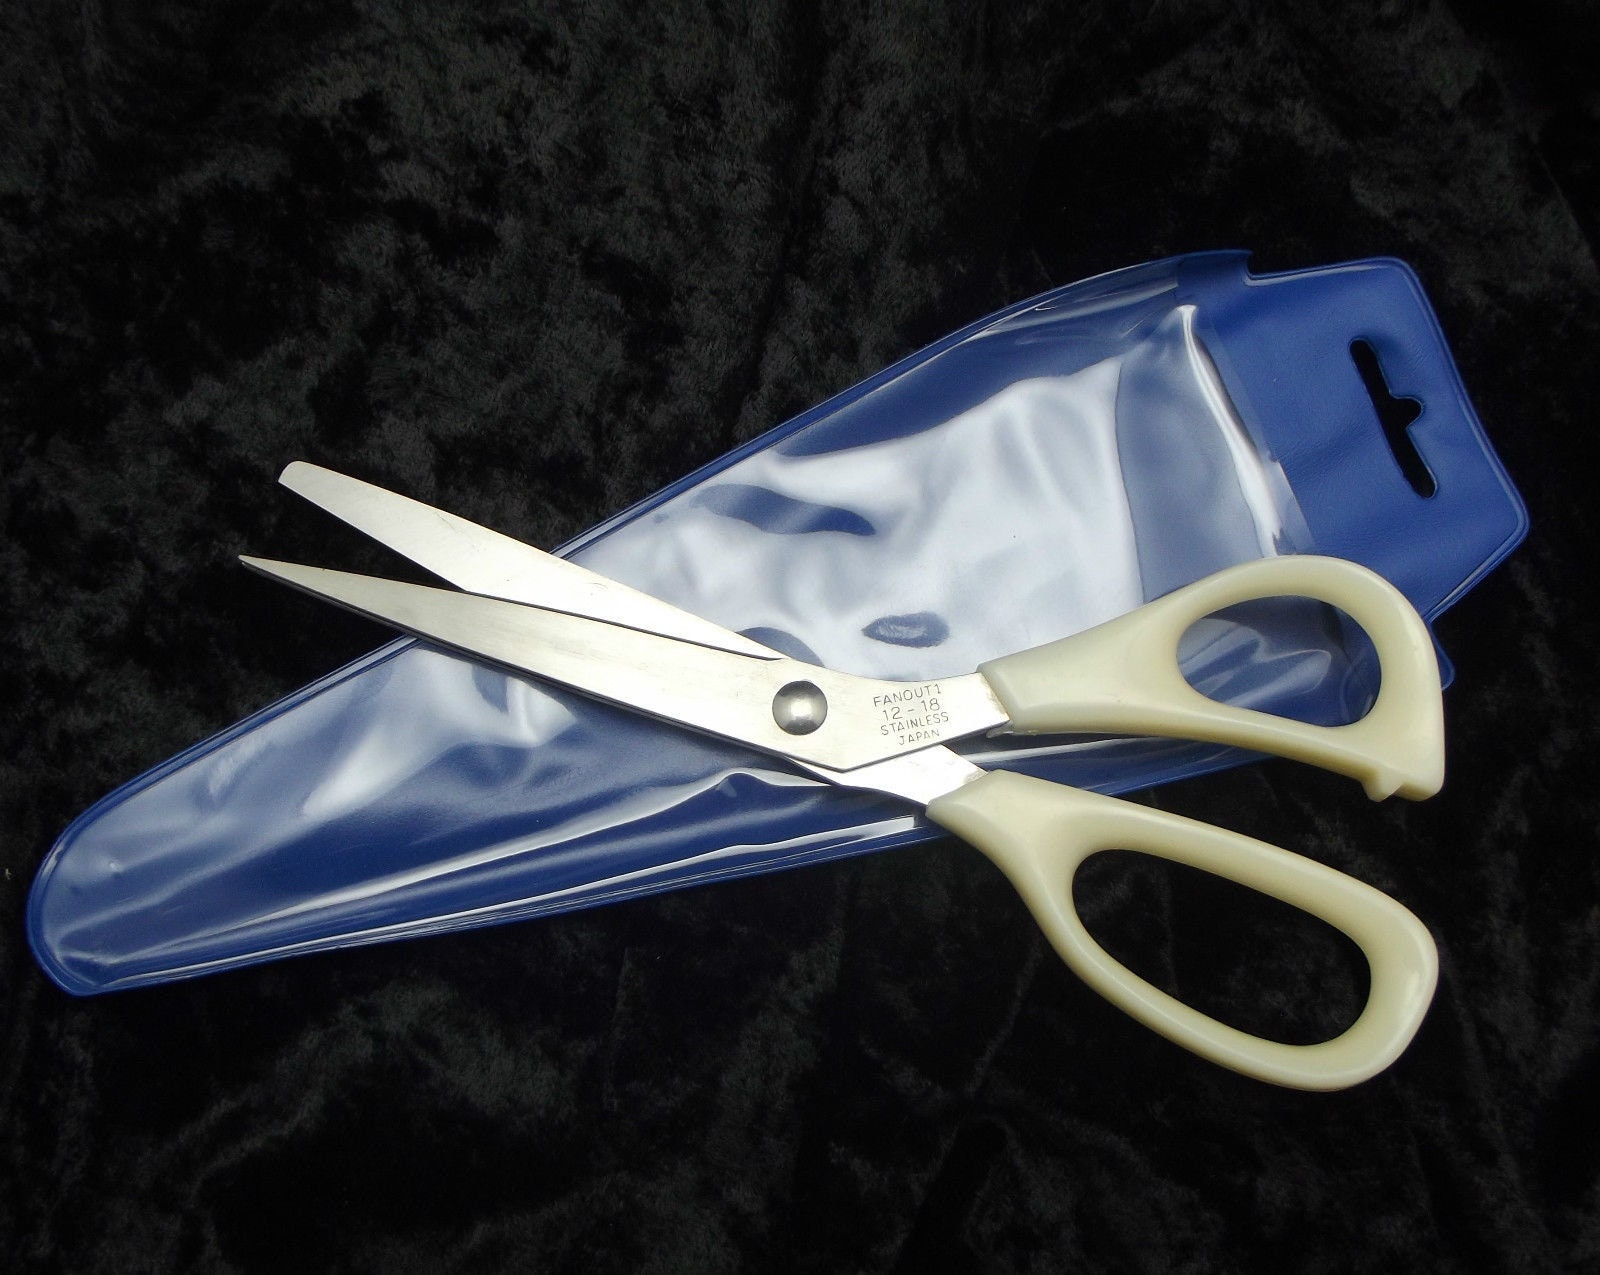 Stained Glass Cutter & Breaking Plier Tools for Stained Glass Sheets. Basic  Steel Wheel Fletcher Brand Cutter, Glass Pro Brand Pliers 